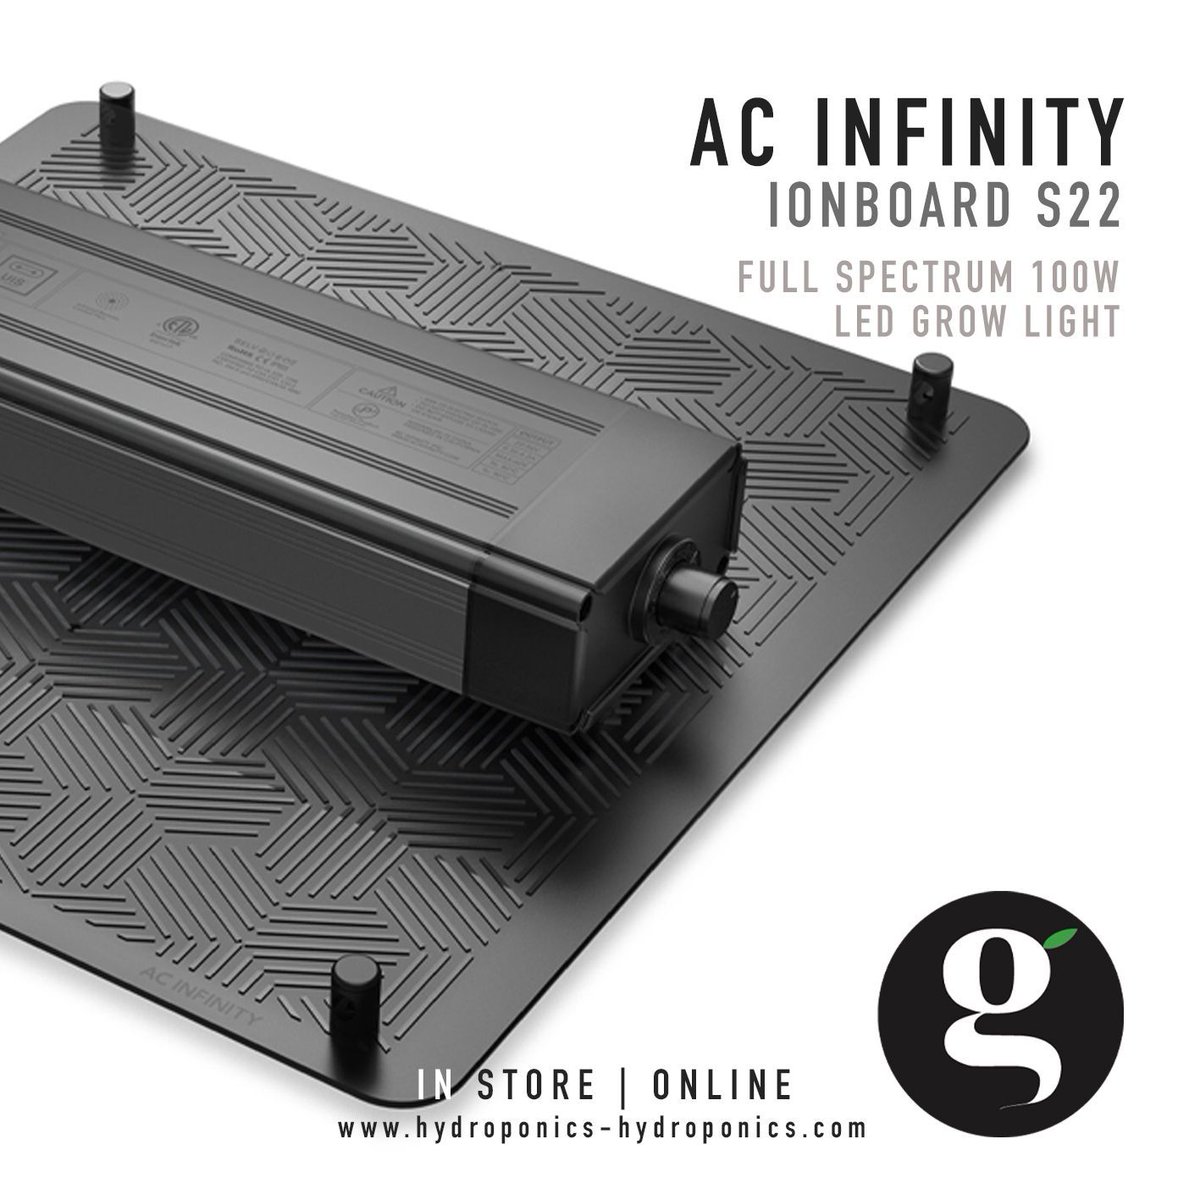 Introducing the IONBOARD Series Full Spectrum 240W LED Grow Lights from AC Infinity

Available in store & online
S33: buff.ly/44odxaA 
S22: buff.ly/4dsZoNx 

#acinfinity #IONBOARDS33 #IONBOARDS22 #ledgrowlights #ukhydro #greatstuffhydro #hydroponics #indoorgrowing